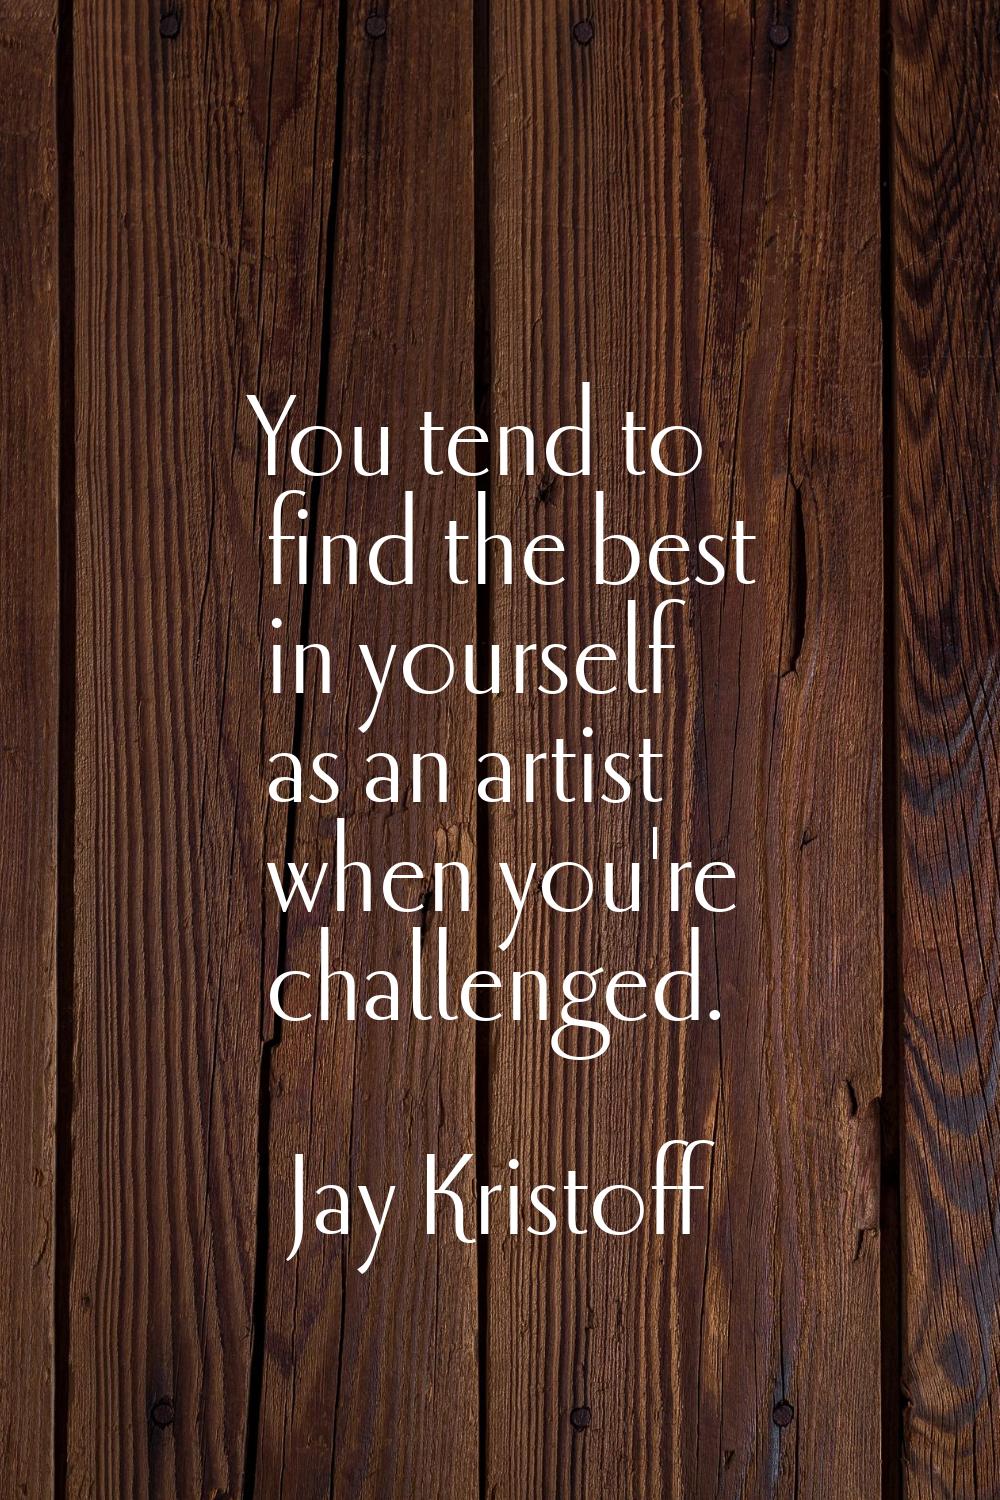 You tend to find the best in yourself as an artist when you're challenged.